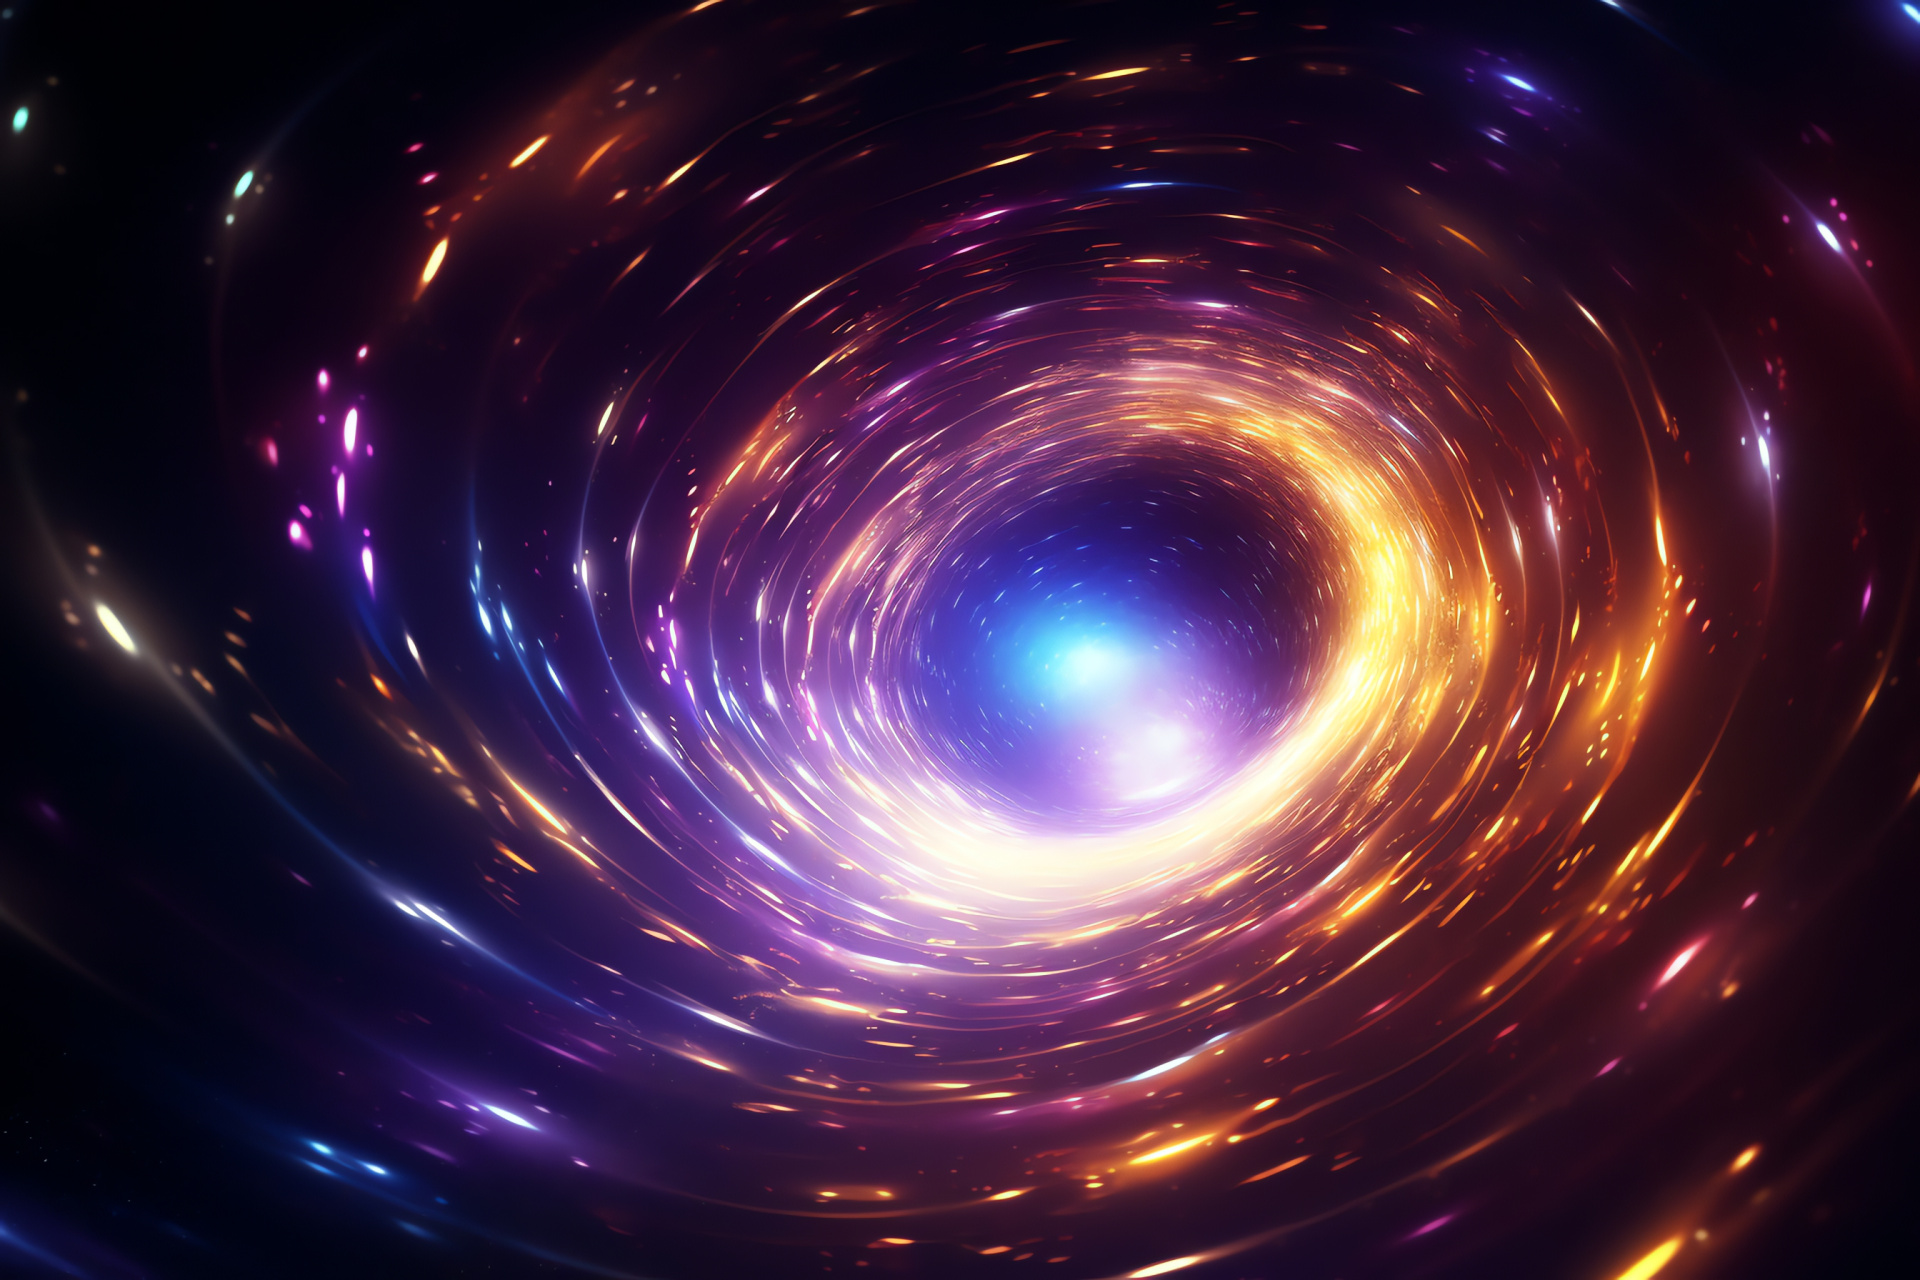 Singularity scene, Wormhole focus, Luminous edges, Complexity within, Space intricacy, HD Desktop Image